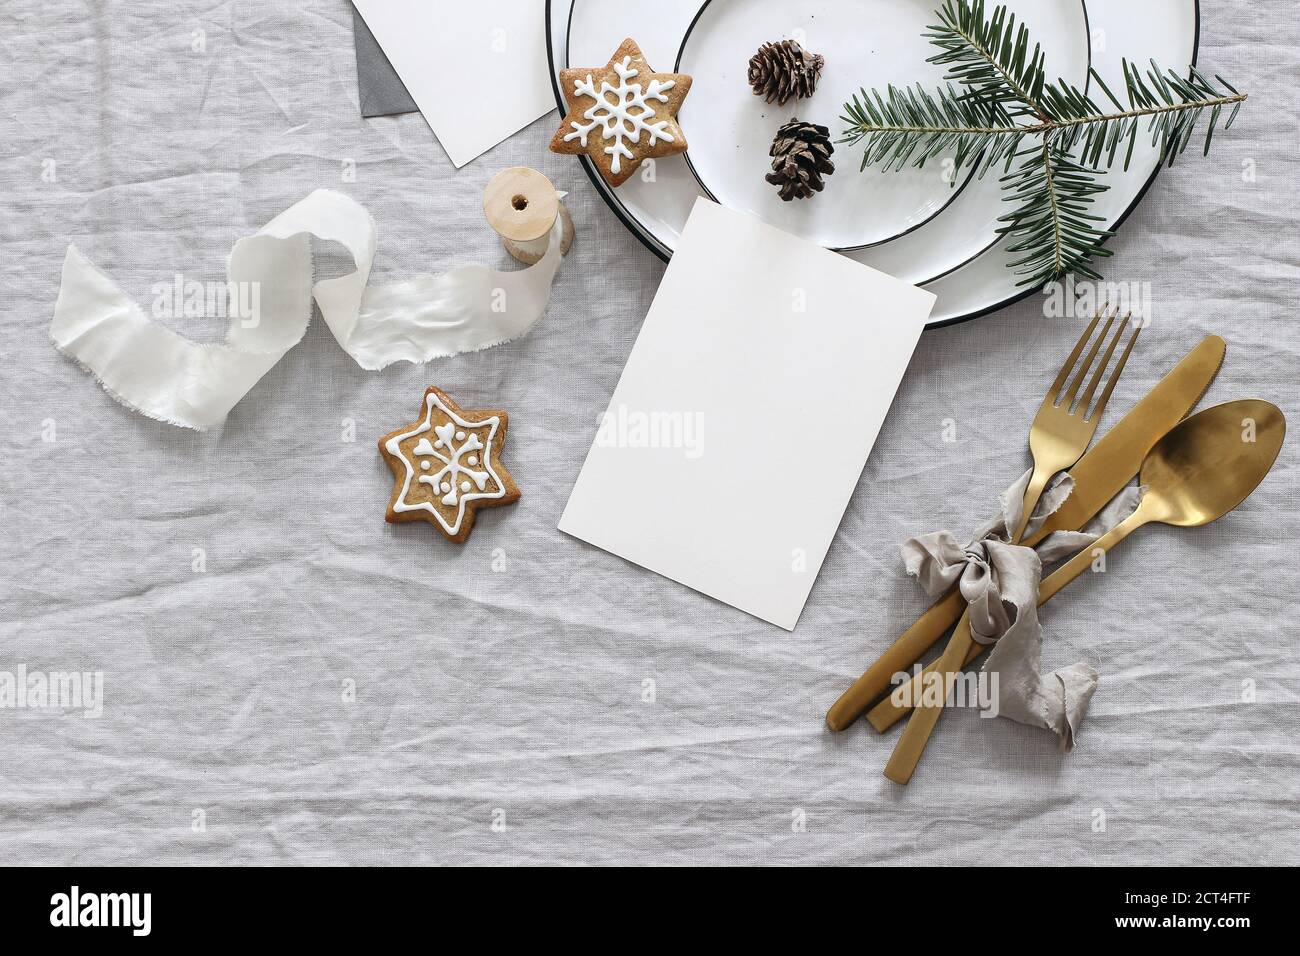 Plates, pine cones on table cloth. Winter festive greeting cards mockup scene. Golden cutlery,gingerbread cookies and fir tree branches. Christmas tab Stock Photo